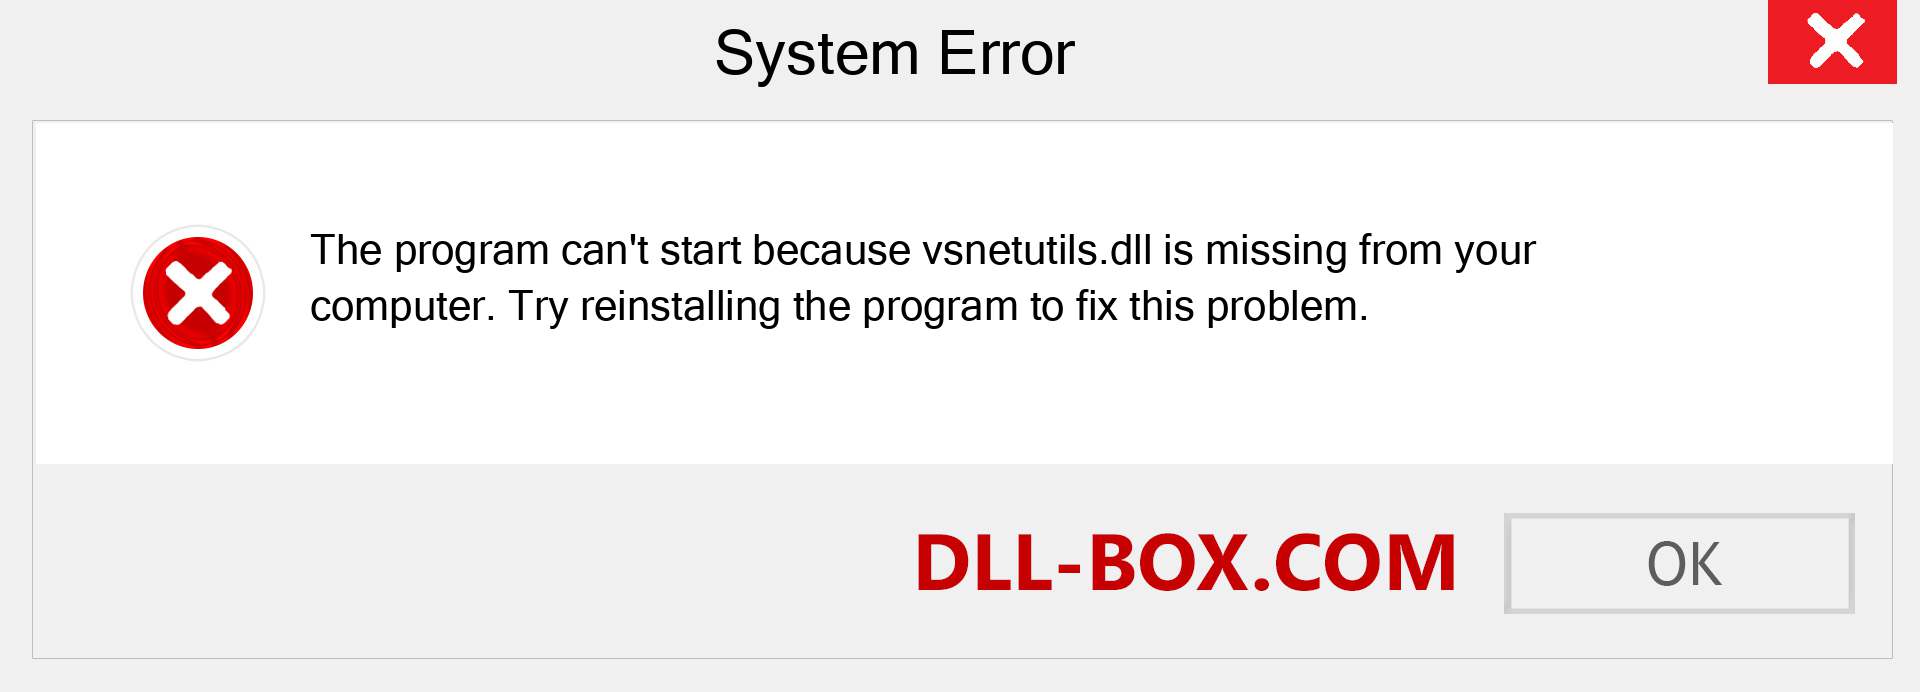  vsnetutils.dll file is missing?. Download for Windows 7, 8, 10 - Fix  vsnetutils dll Missing Error on Windows, photos, images